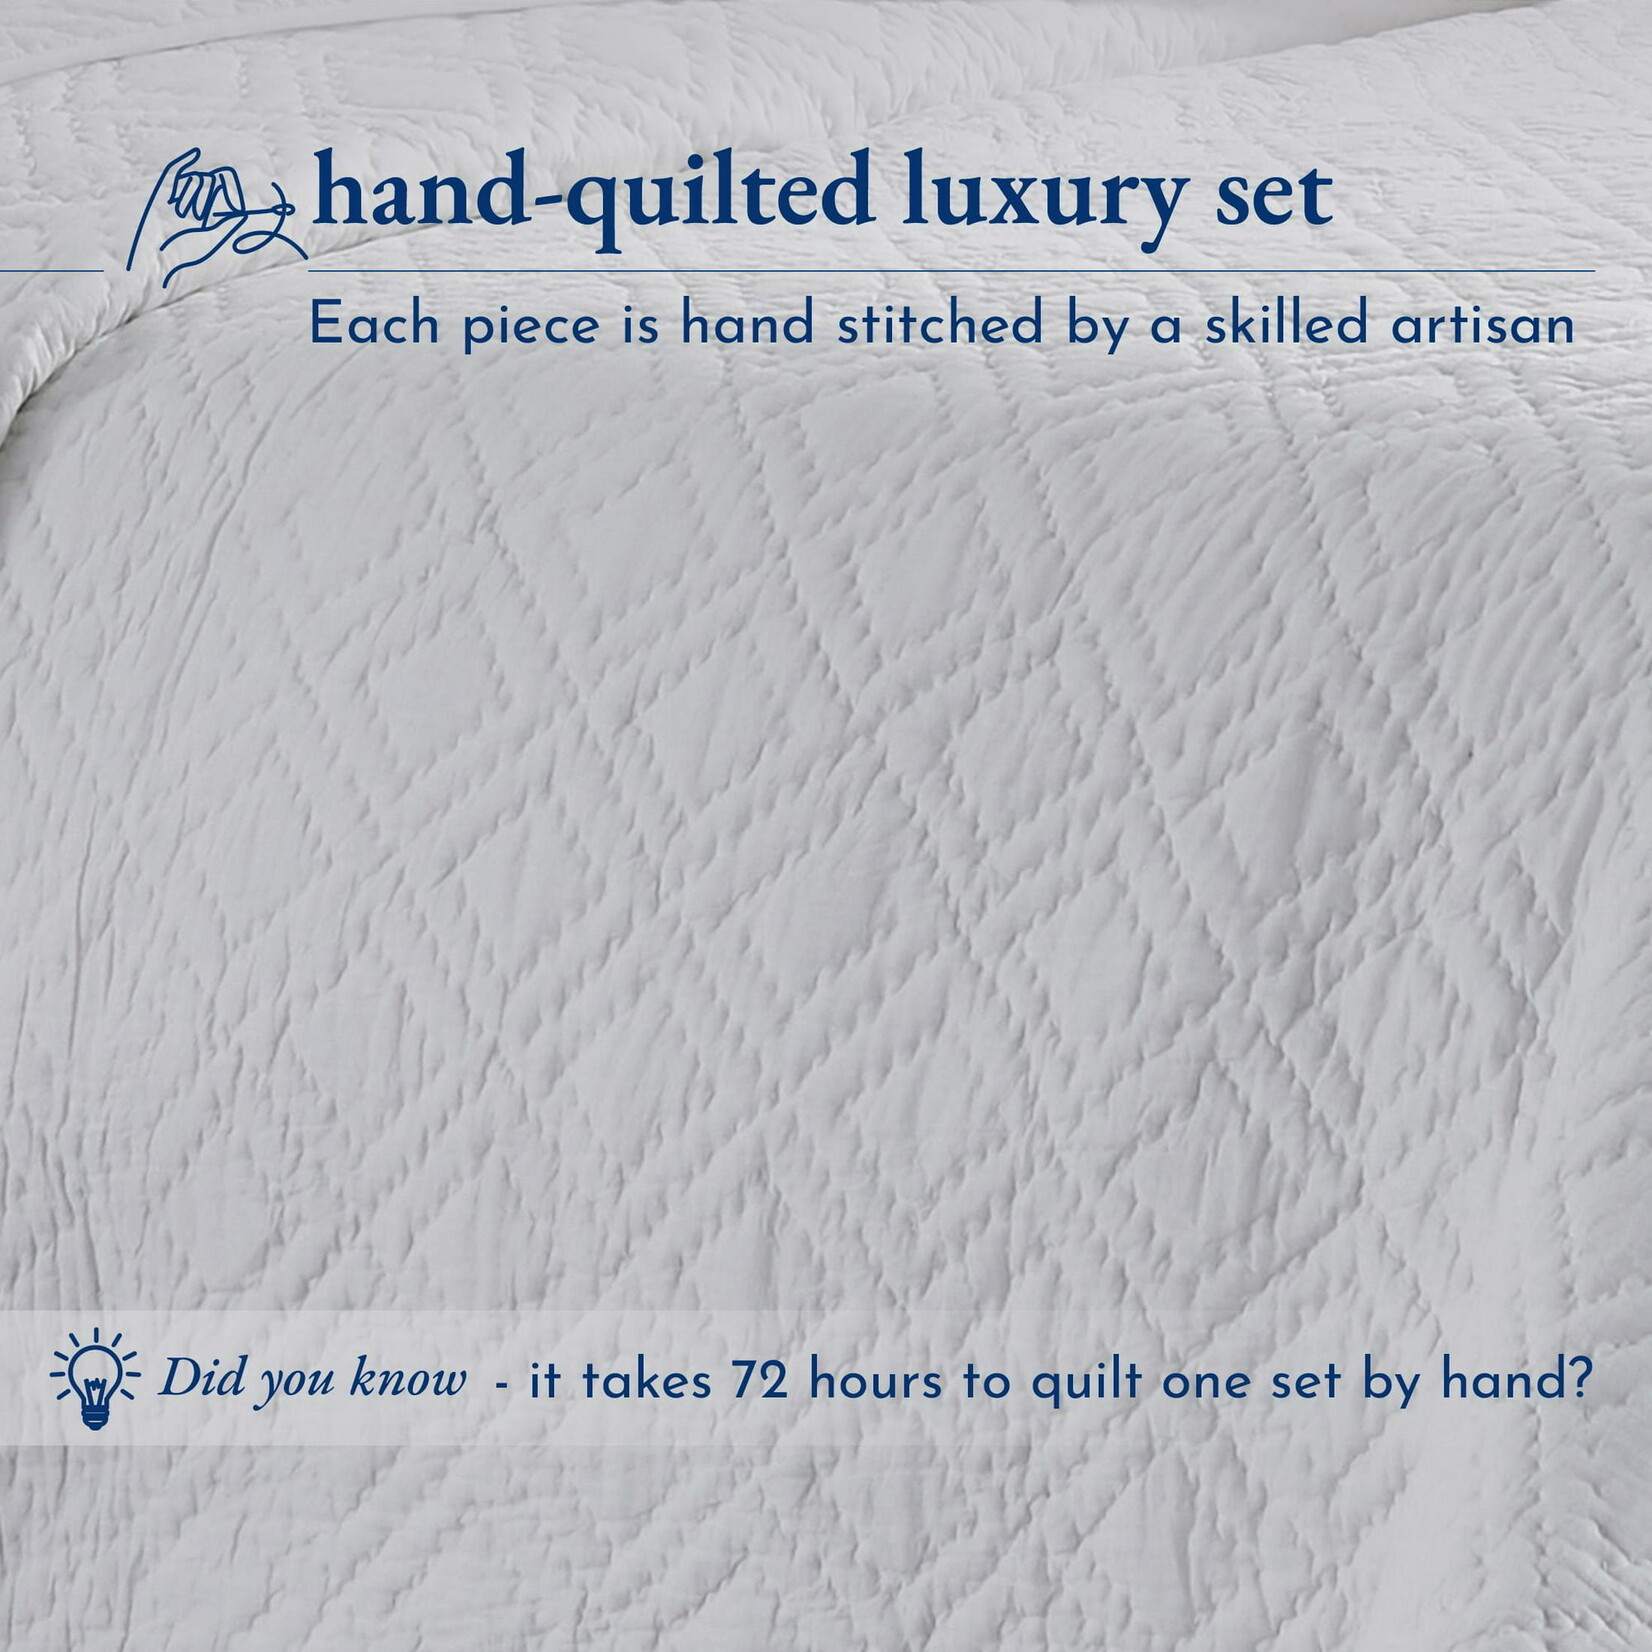 California Design Den Cotton Hand-Quilted 3 Pc Set - King - White